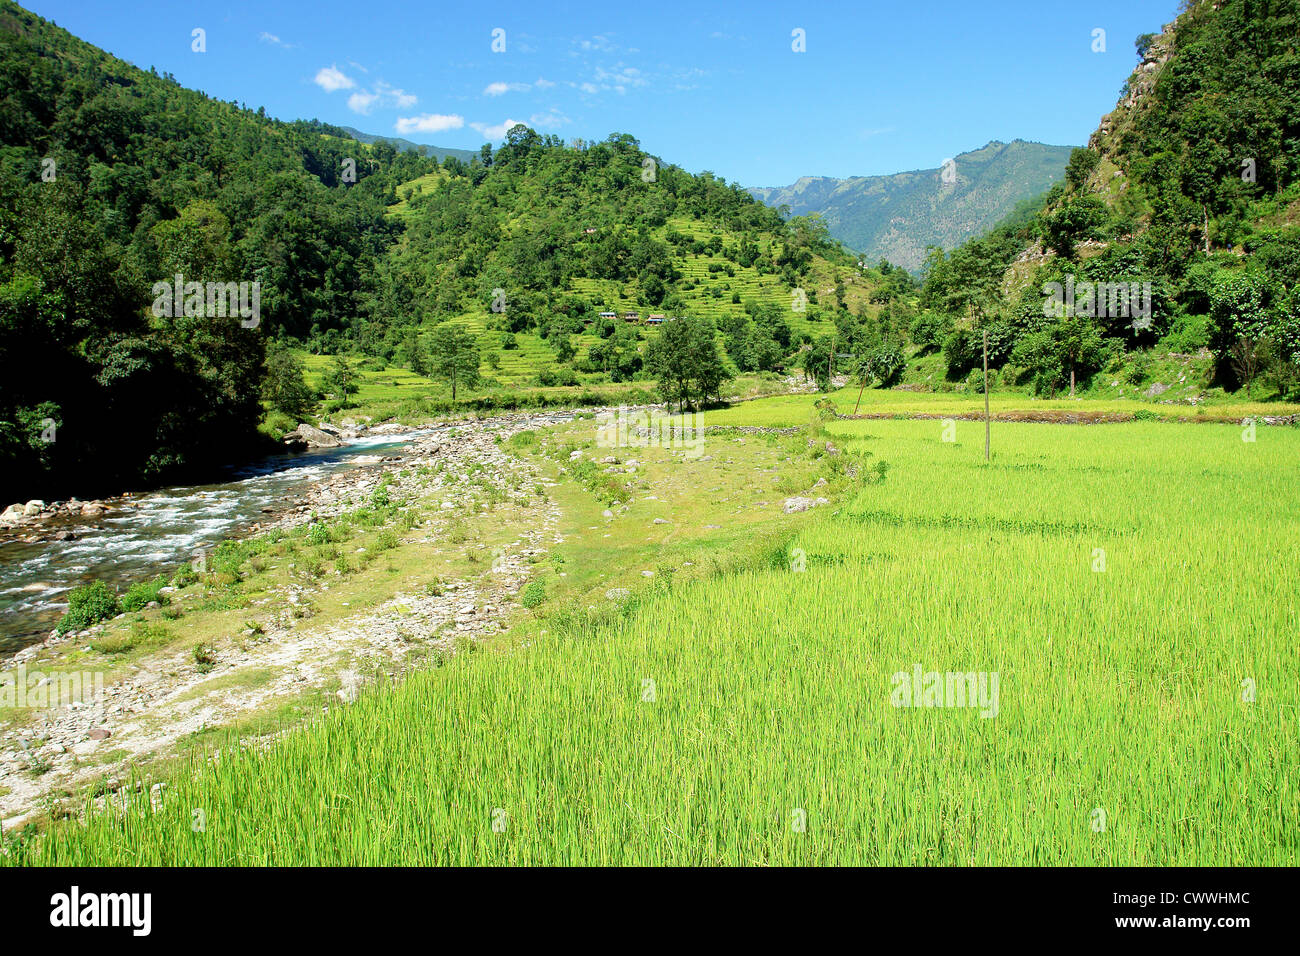 Green rice fields and mountain river landscape, trek to Annapurna Base Camp in Nepal Stock Photo